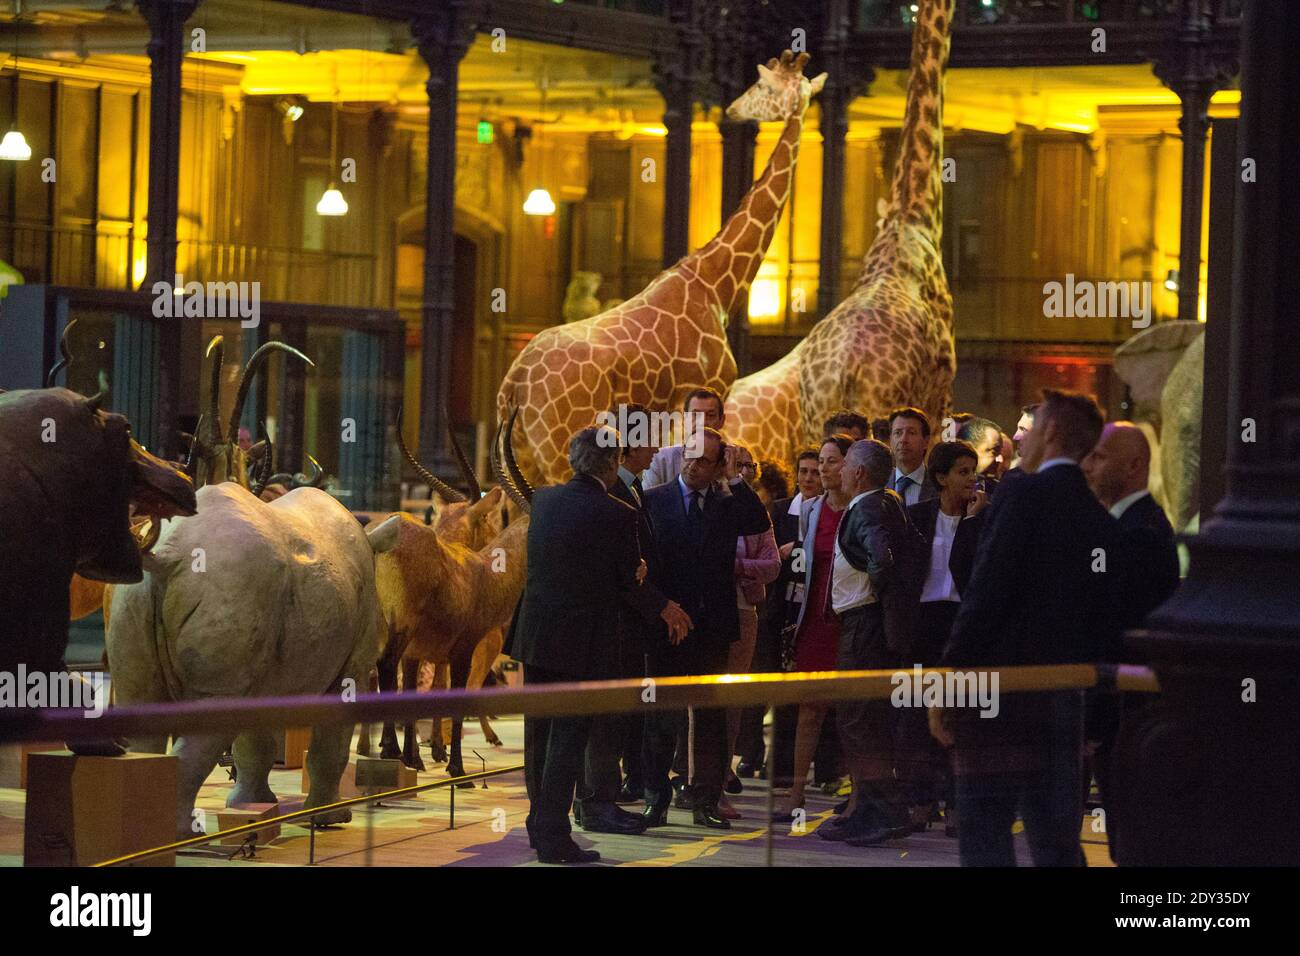 French President Francois Hollande during his visit to the Great Gallery of Evolution at the National museum of natural history in Paris on October 4, 2014. The Great Gallery of Evolution presents 7,000 species from both land and sea, including some extinct species, and celebrates this year its 20th anniversary. Paris, FRANCE - 04/10/2014 Photo by Revelli-Beaumont/ Pool/ ABACAPRESS.COM Stock Photo